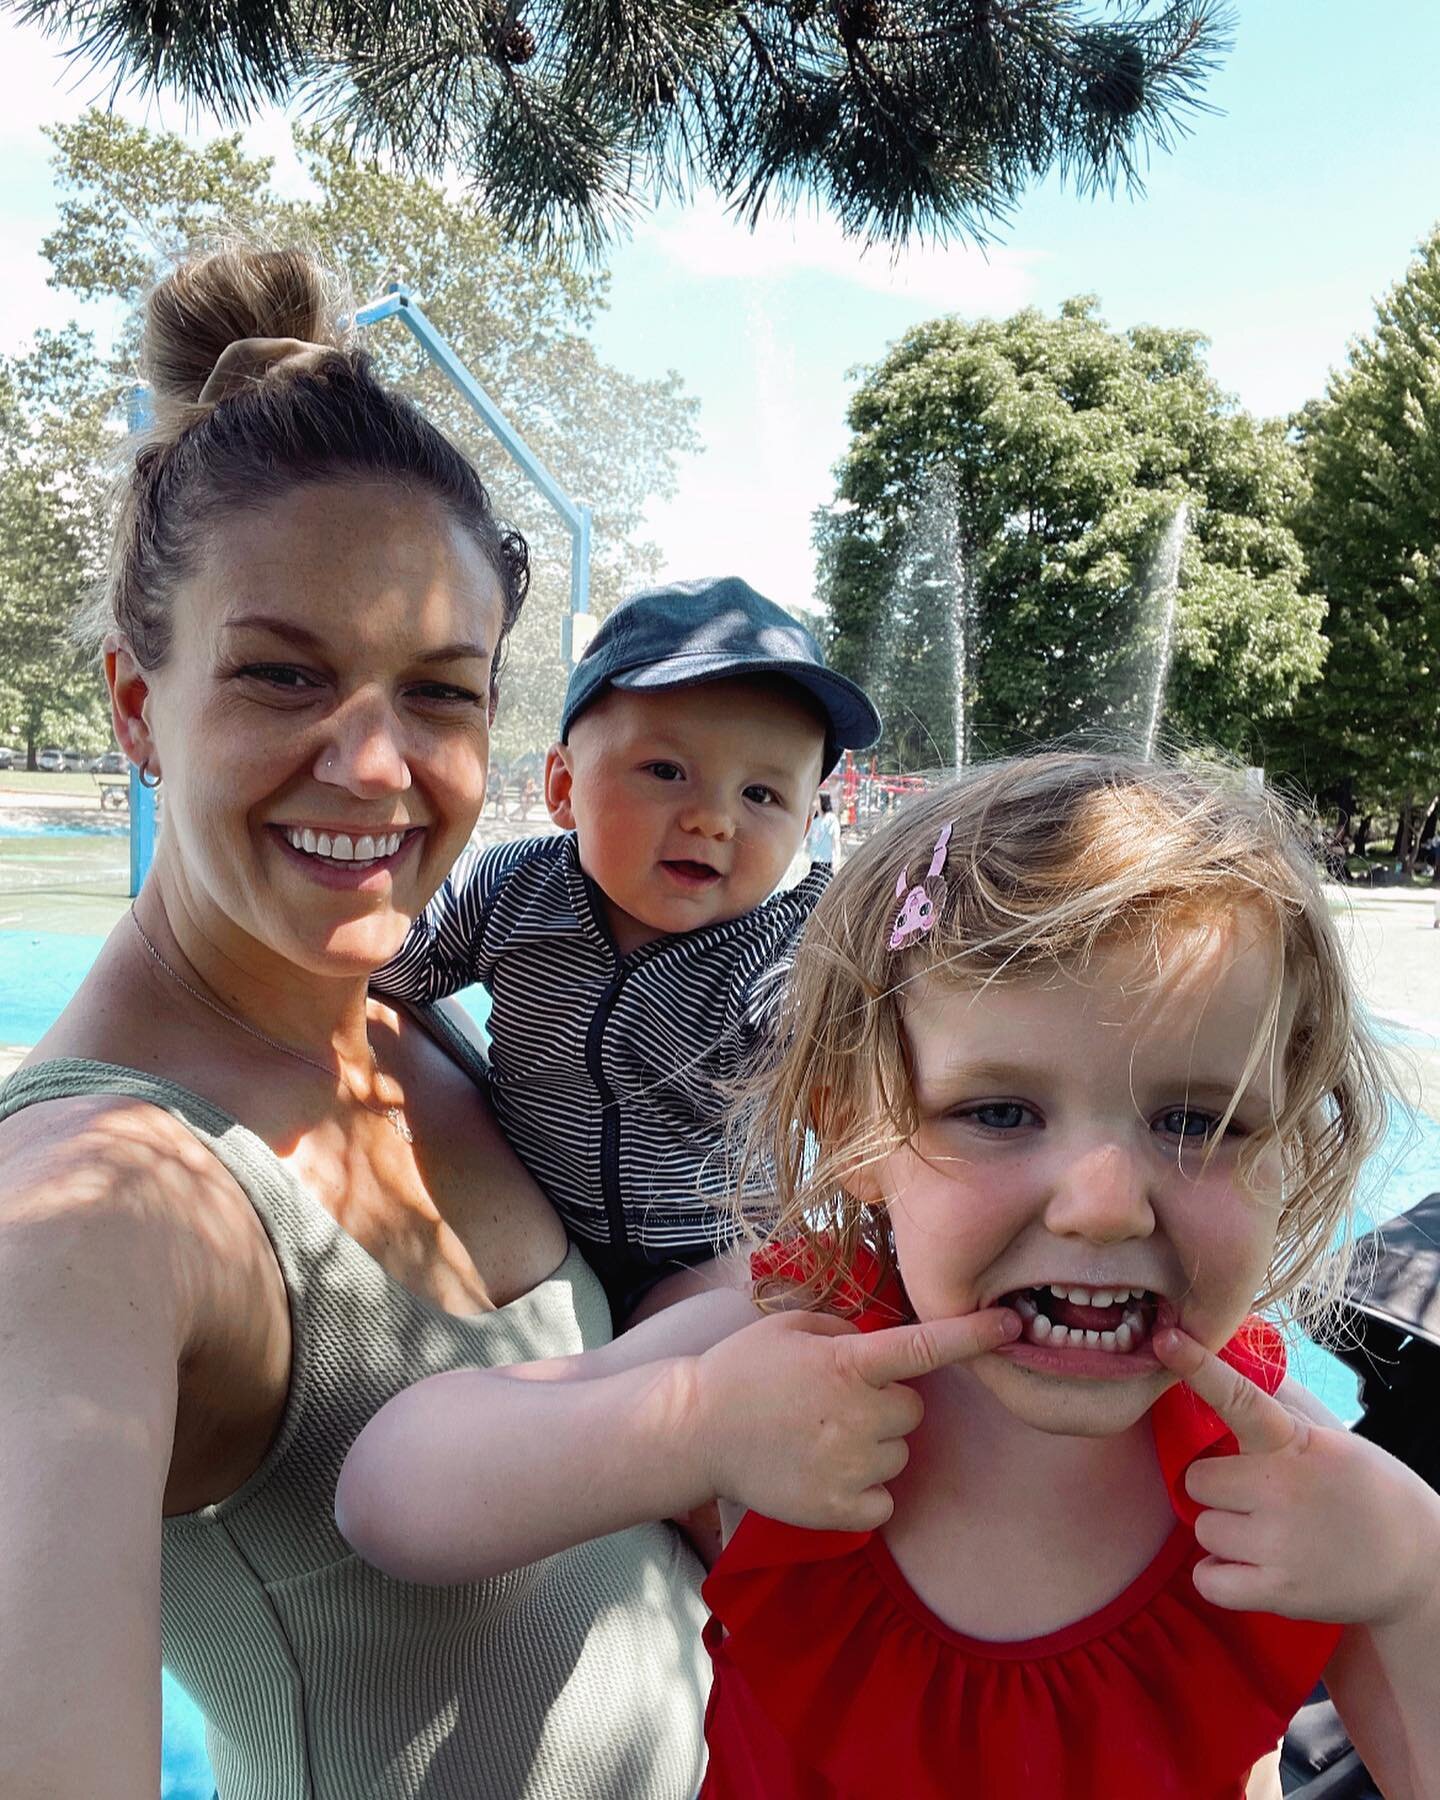 This chapter is all about change and growth. The final farewells to Vancouver, making the most of summer amidst packing and moving prep, the dynamic dance of our young family perceptibly growing before our eyes.

Despite this being an emotionally and